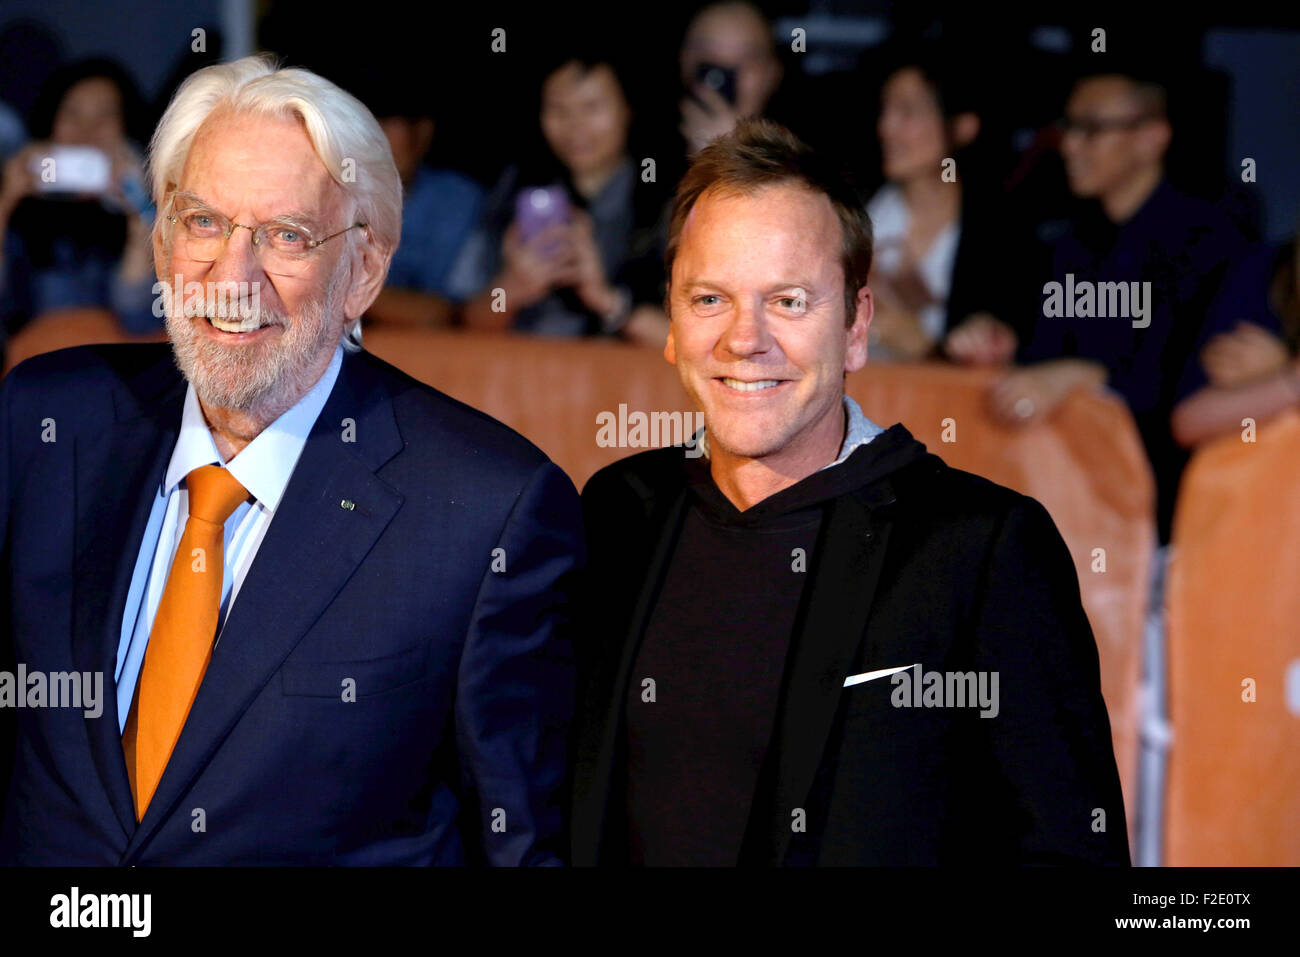 Actors Donald Sutherland (l) and Kiefer Sutherland attend the premiere of Forsaken during the 40th Toronto International Film Festival, TIFF, at Roy Thomson Hall in Toronto, Canada, on 15 September 2015. Photo: Hubert Boesl /dpa - NO WIRE SERVICE - Stock Photo